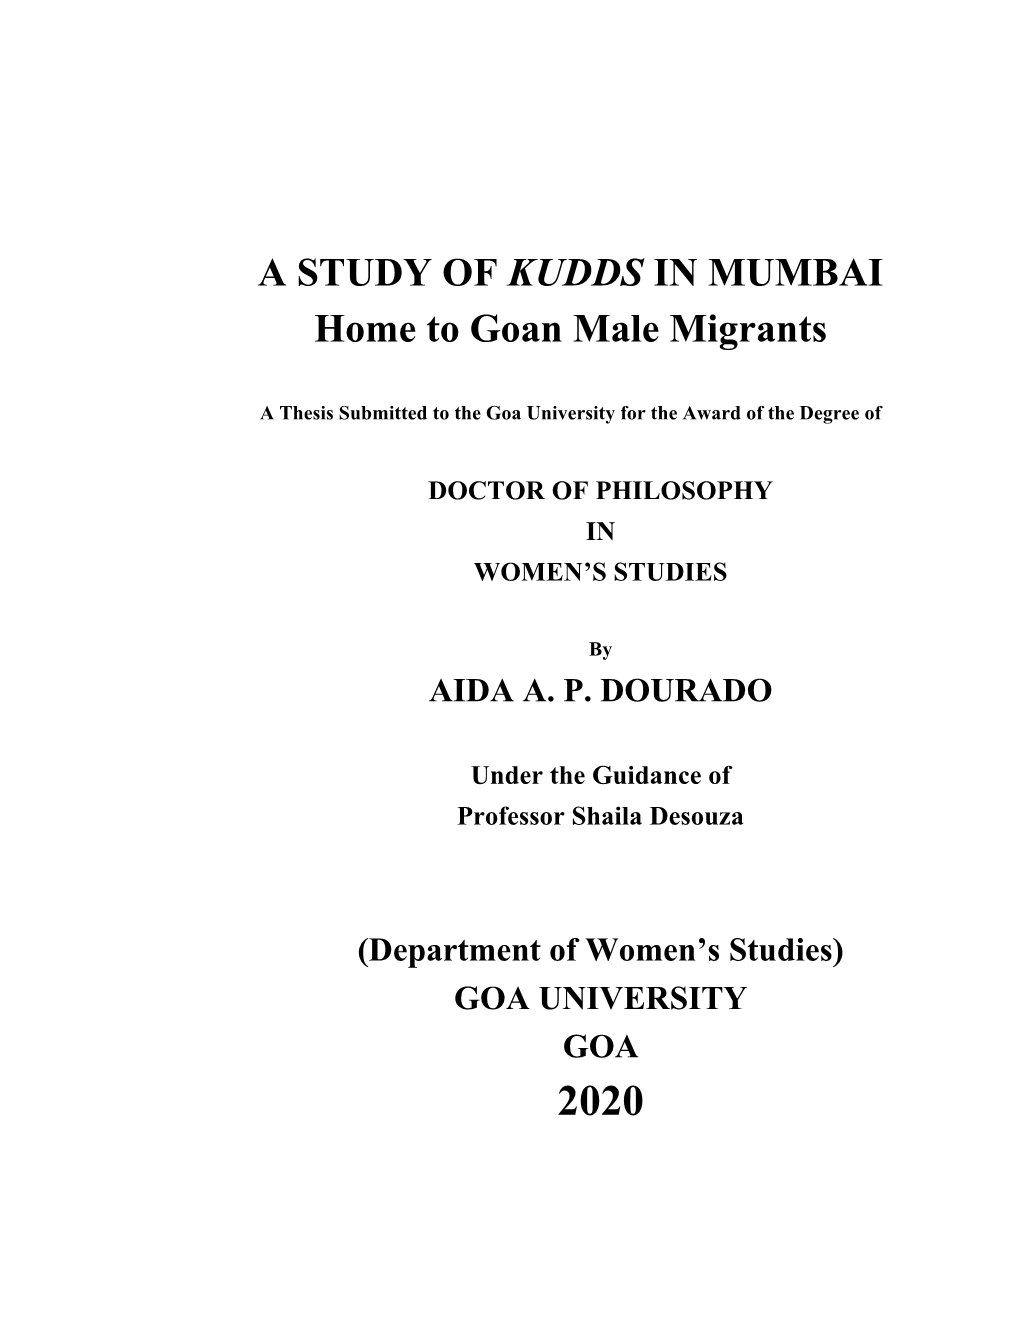 A STUDY of KUDDS in MUMBAI Home to Goan Male Migrants